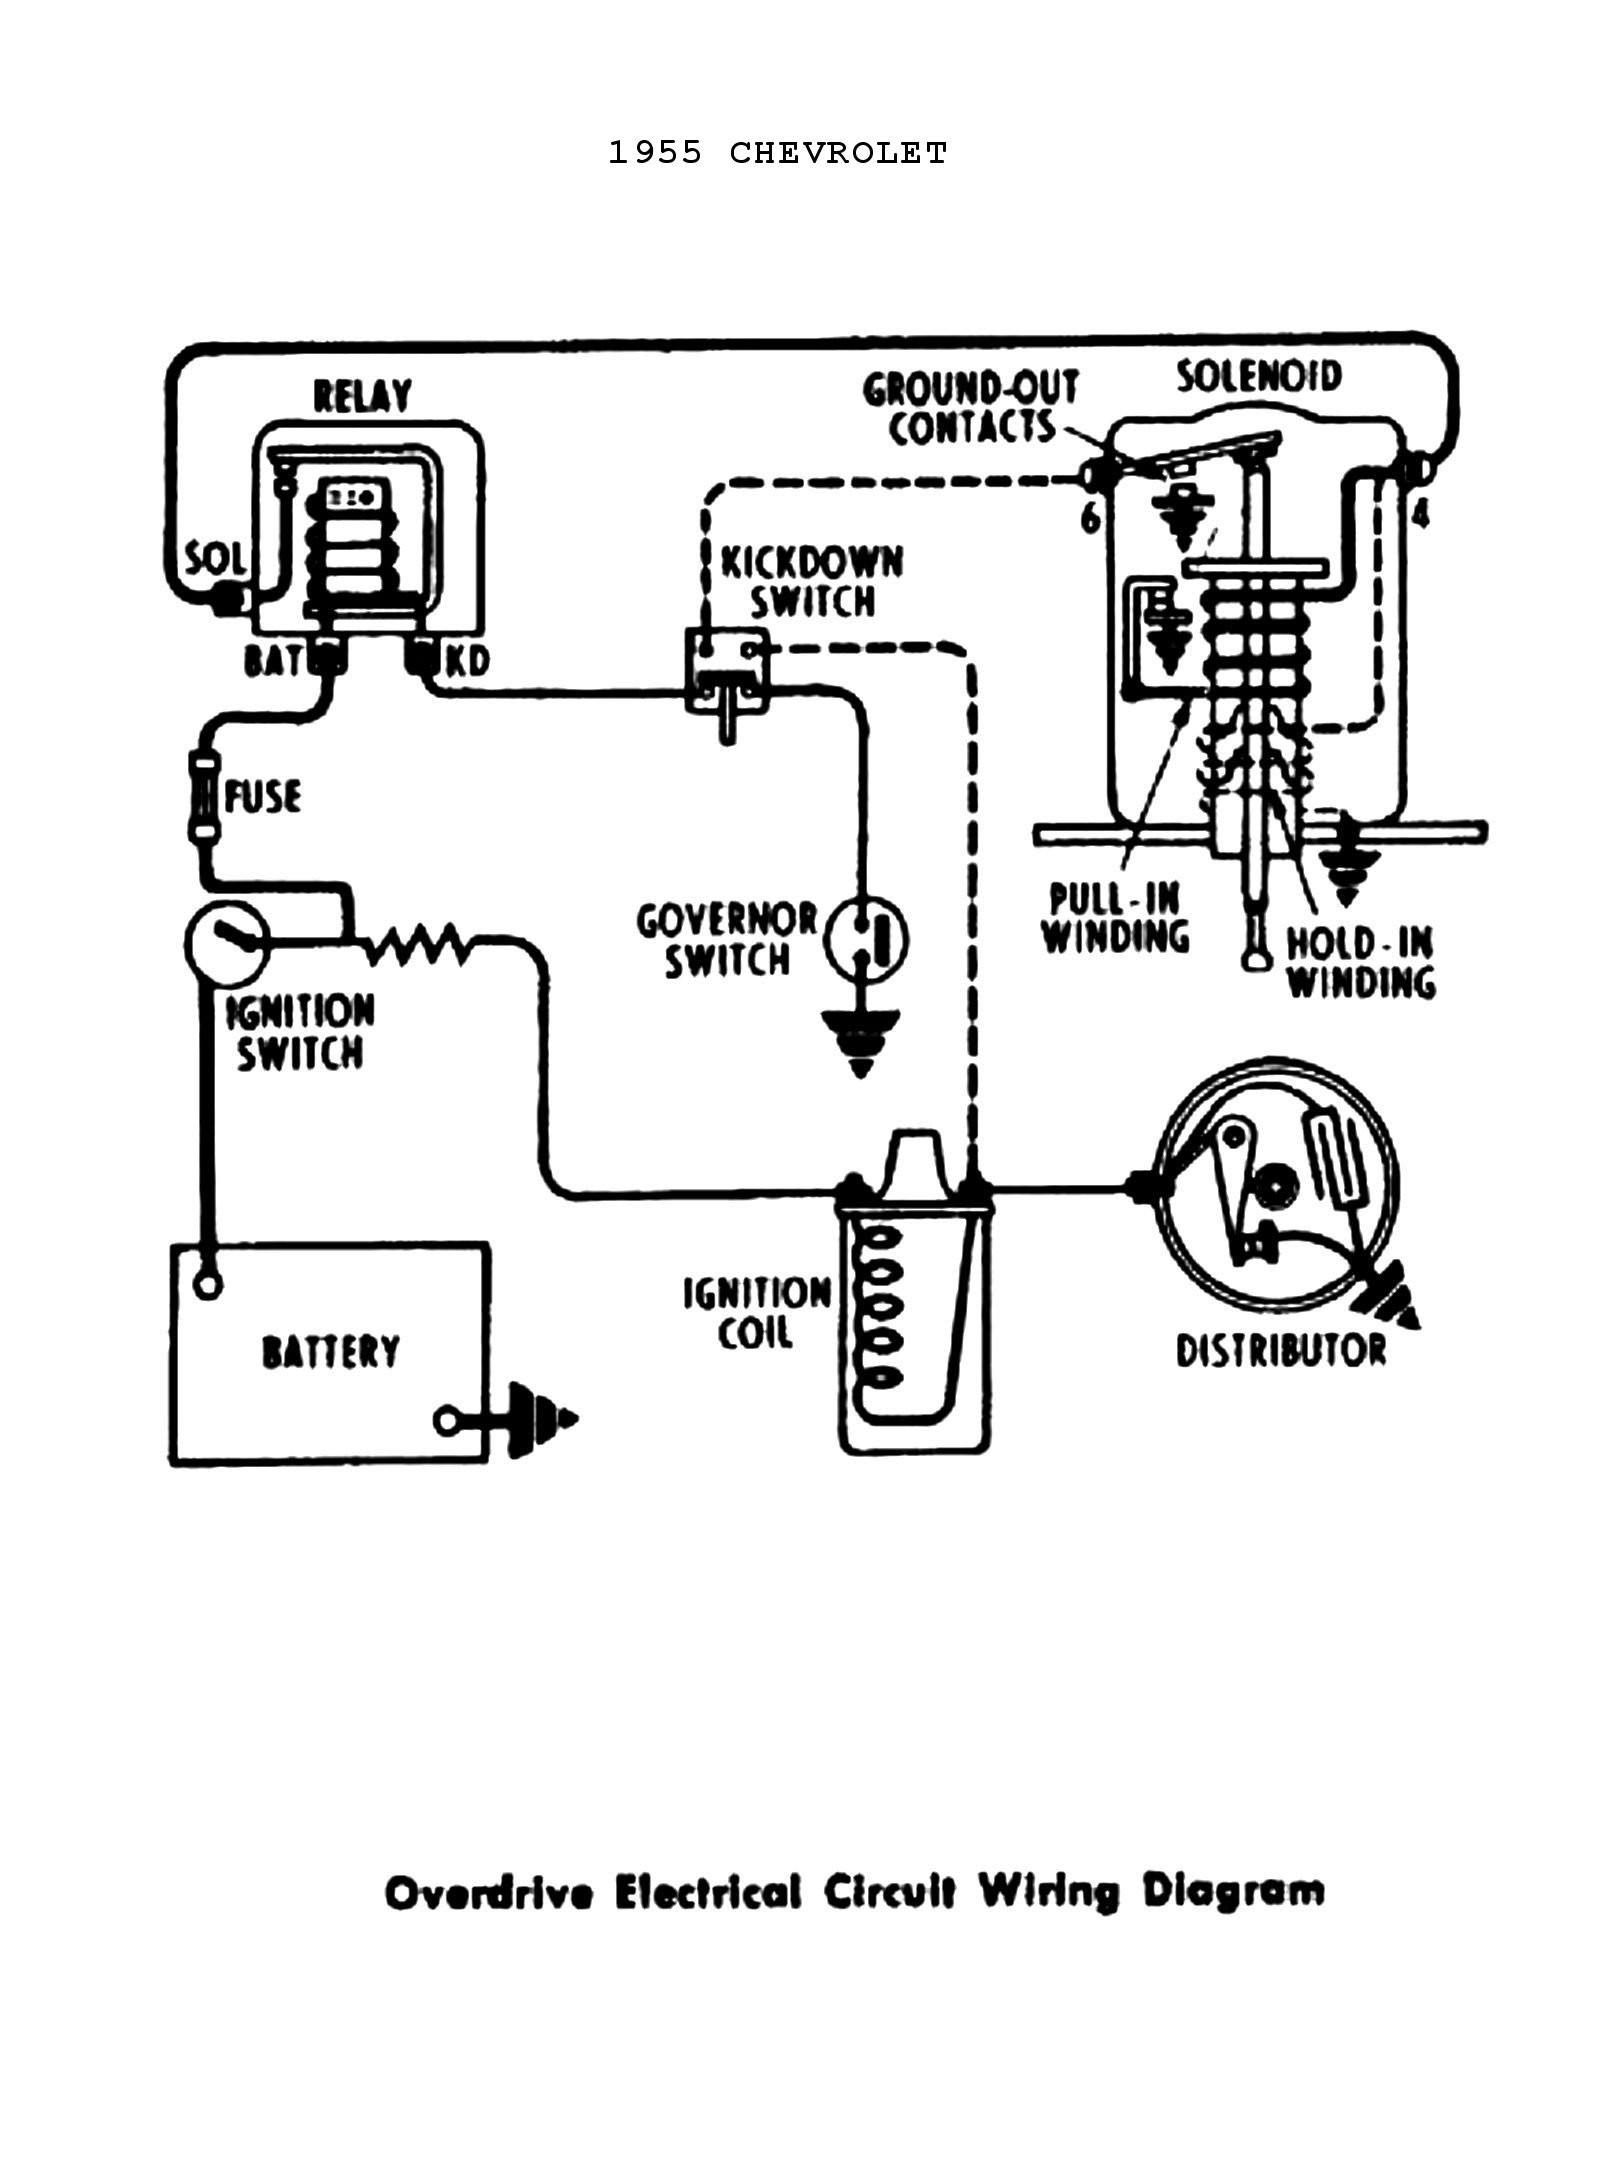 Car Ignition System Wiring Diagram Ignition Switch Wiring Diagram Chevy 55odtrans1 Screnshoots Lovely